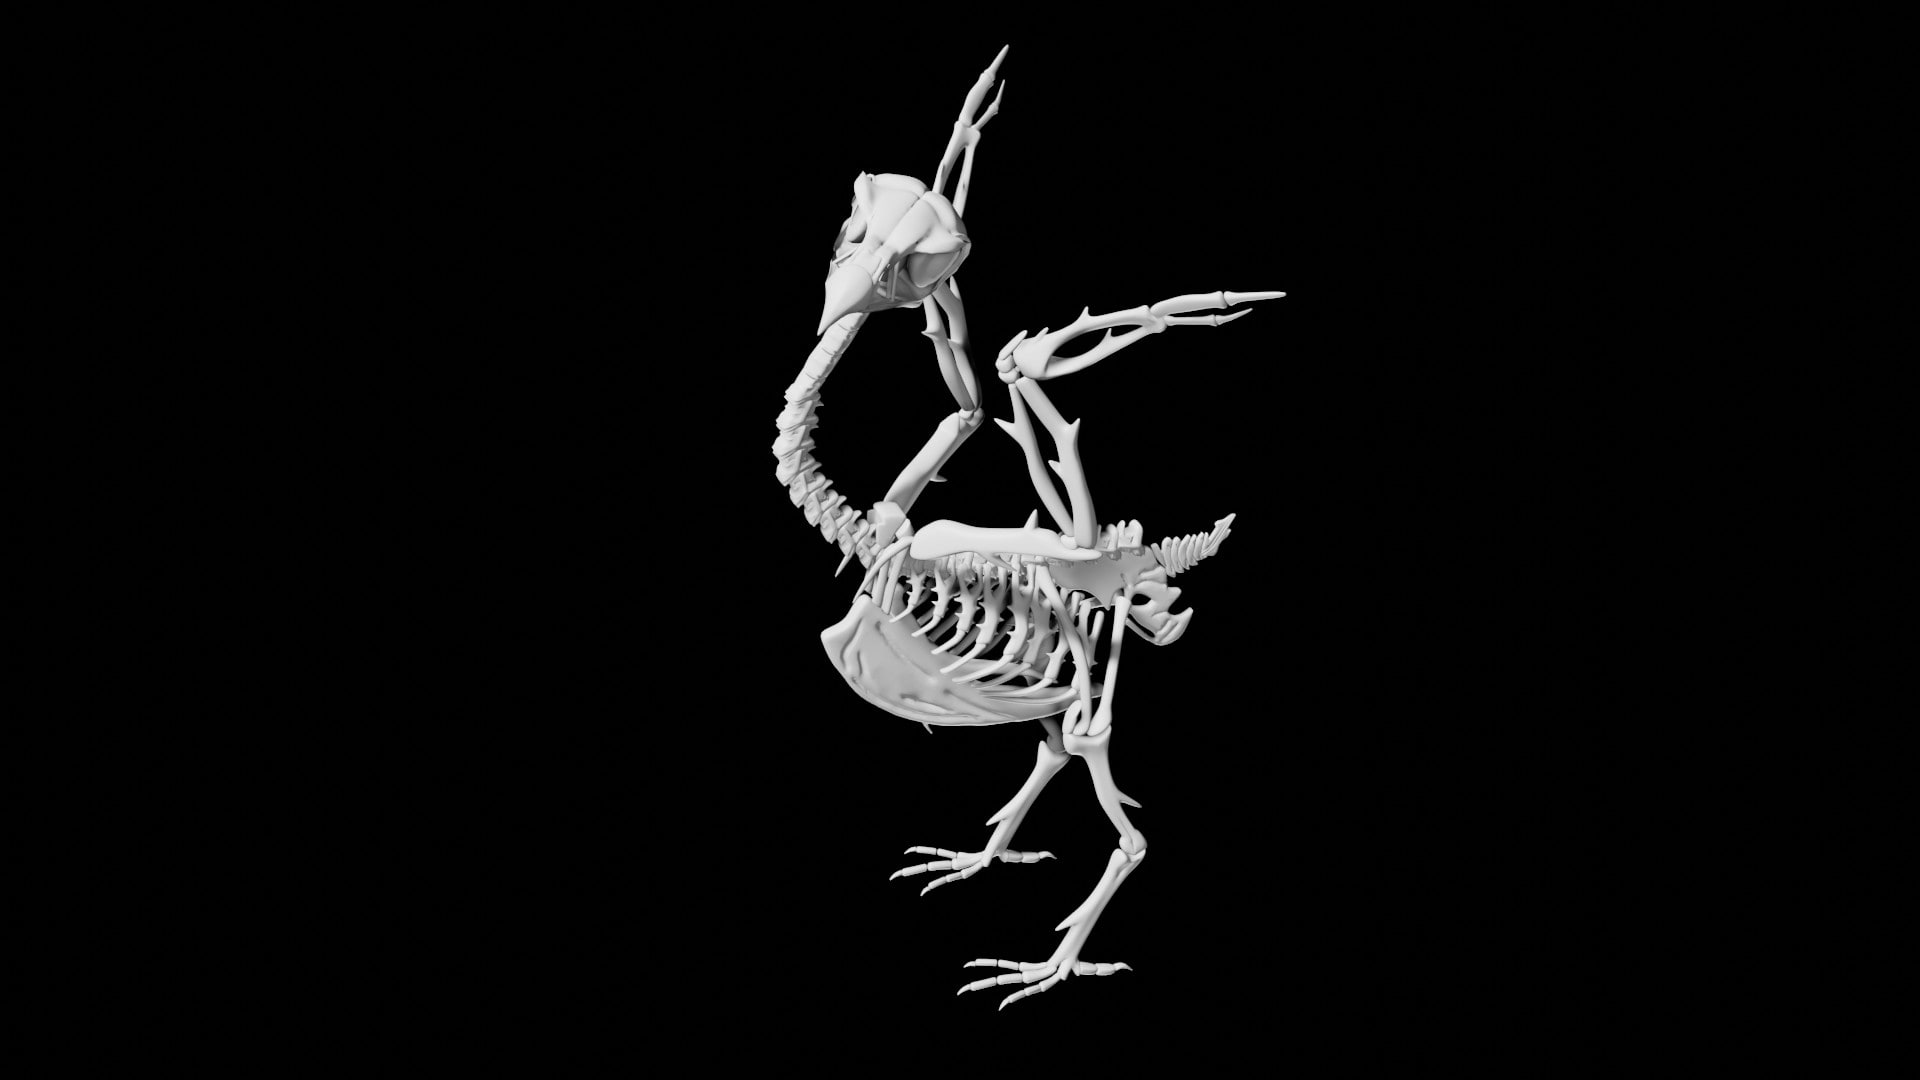 Bird Skeleton 3d Model Rigged And Low Poly Team 3d Yard